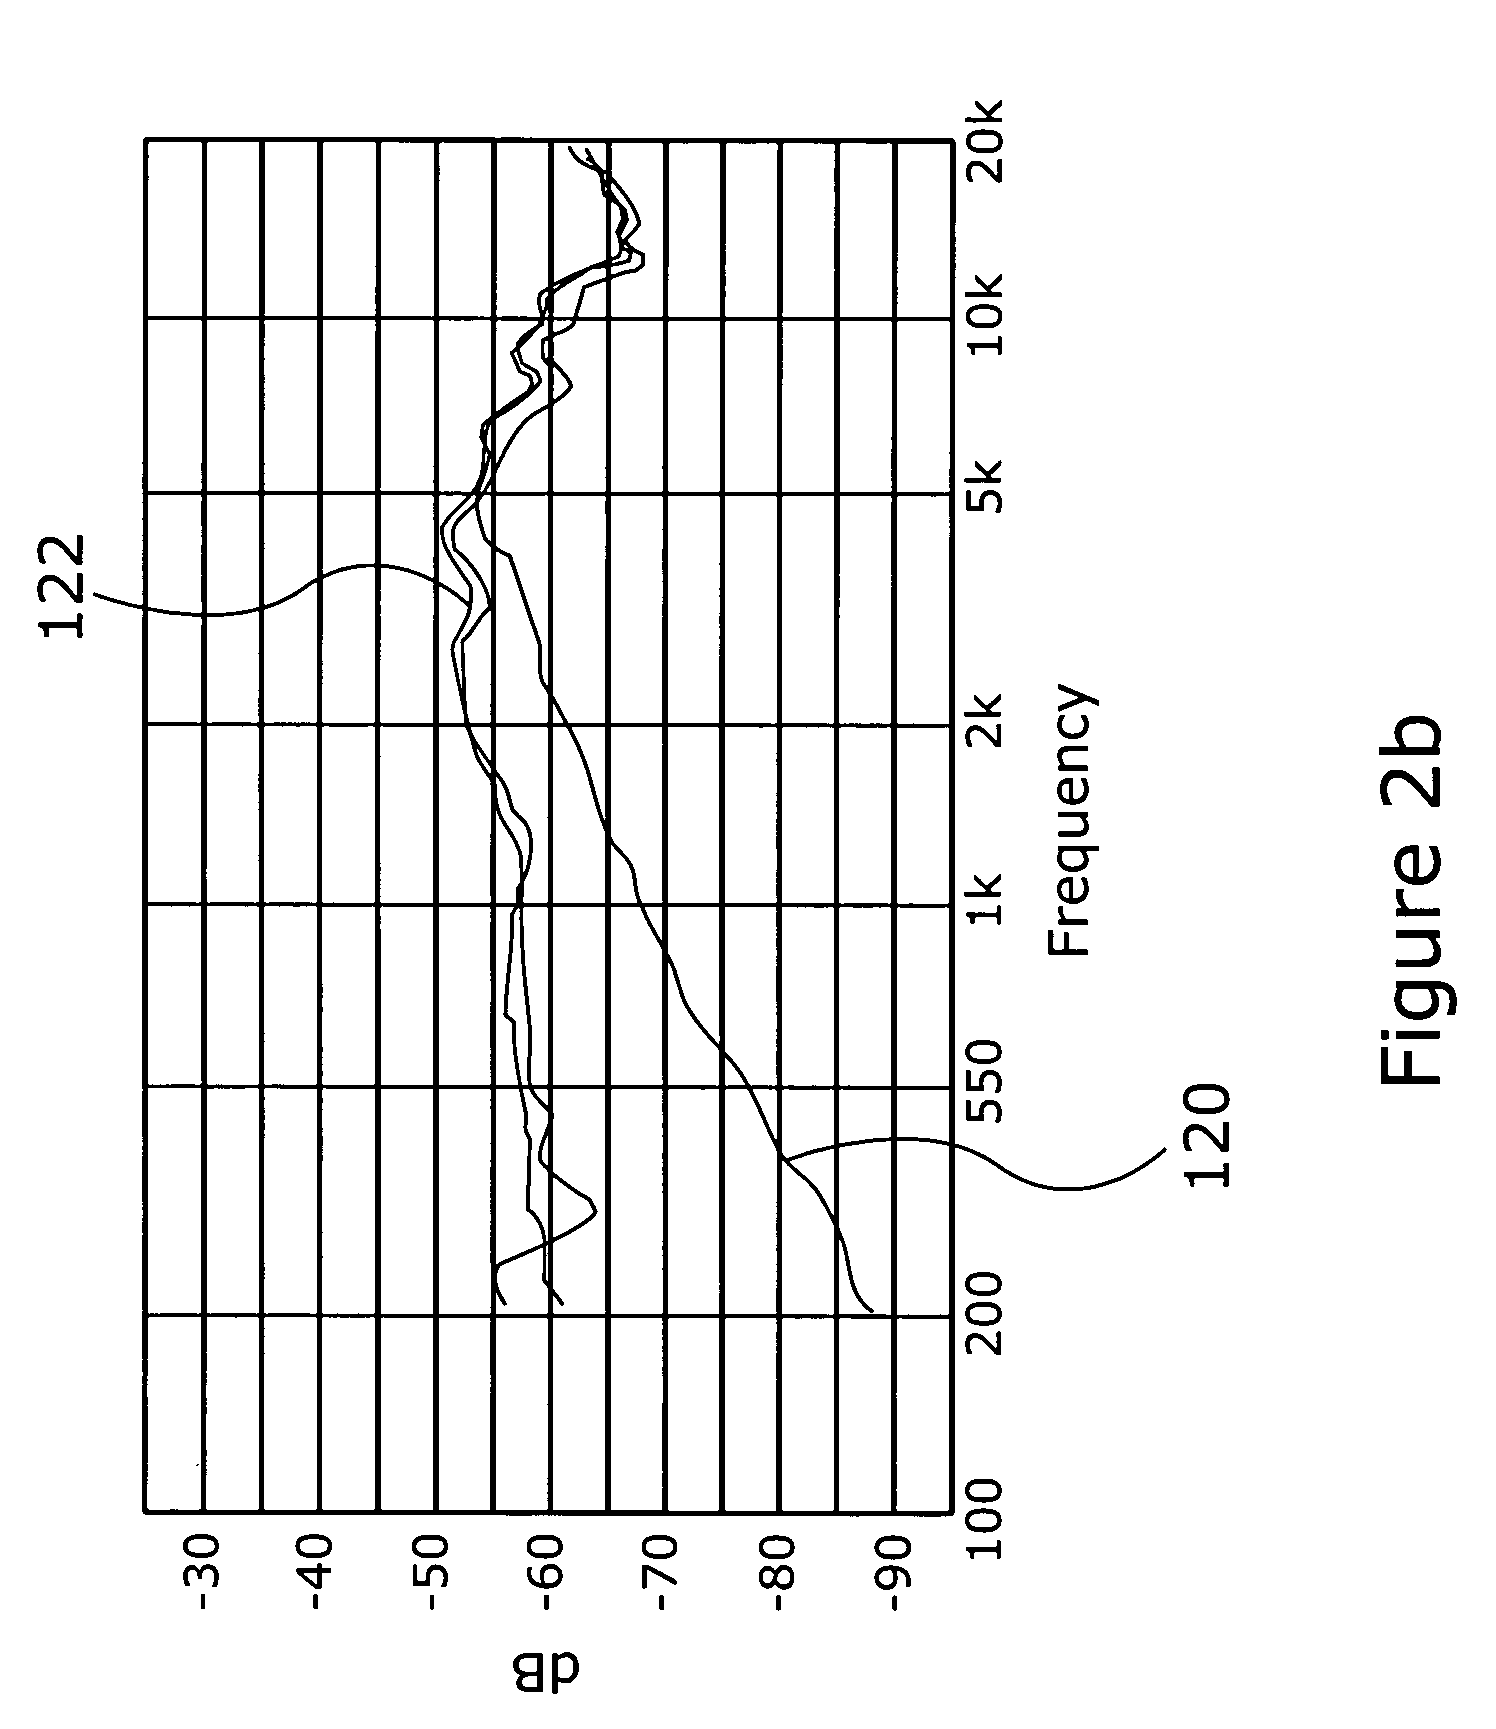 High-order directional microphone diaphragm